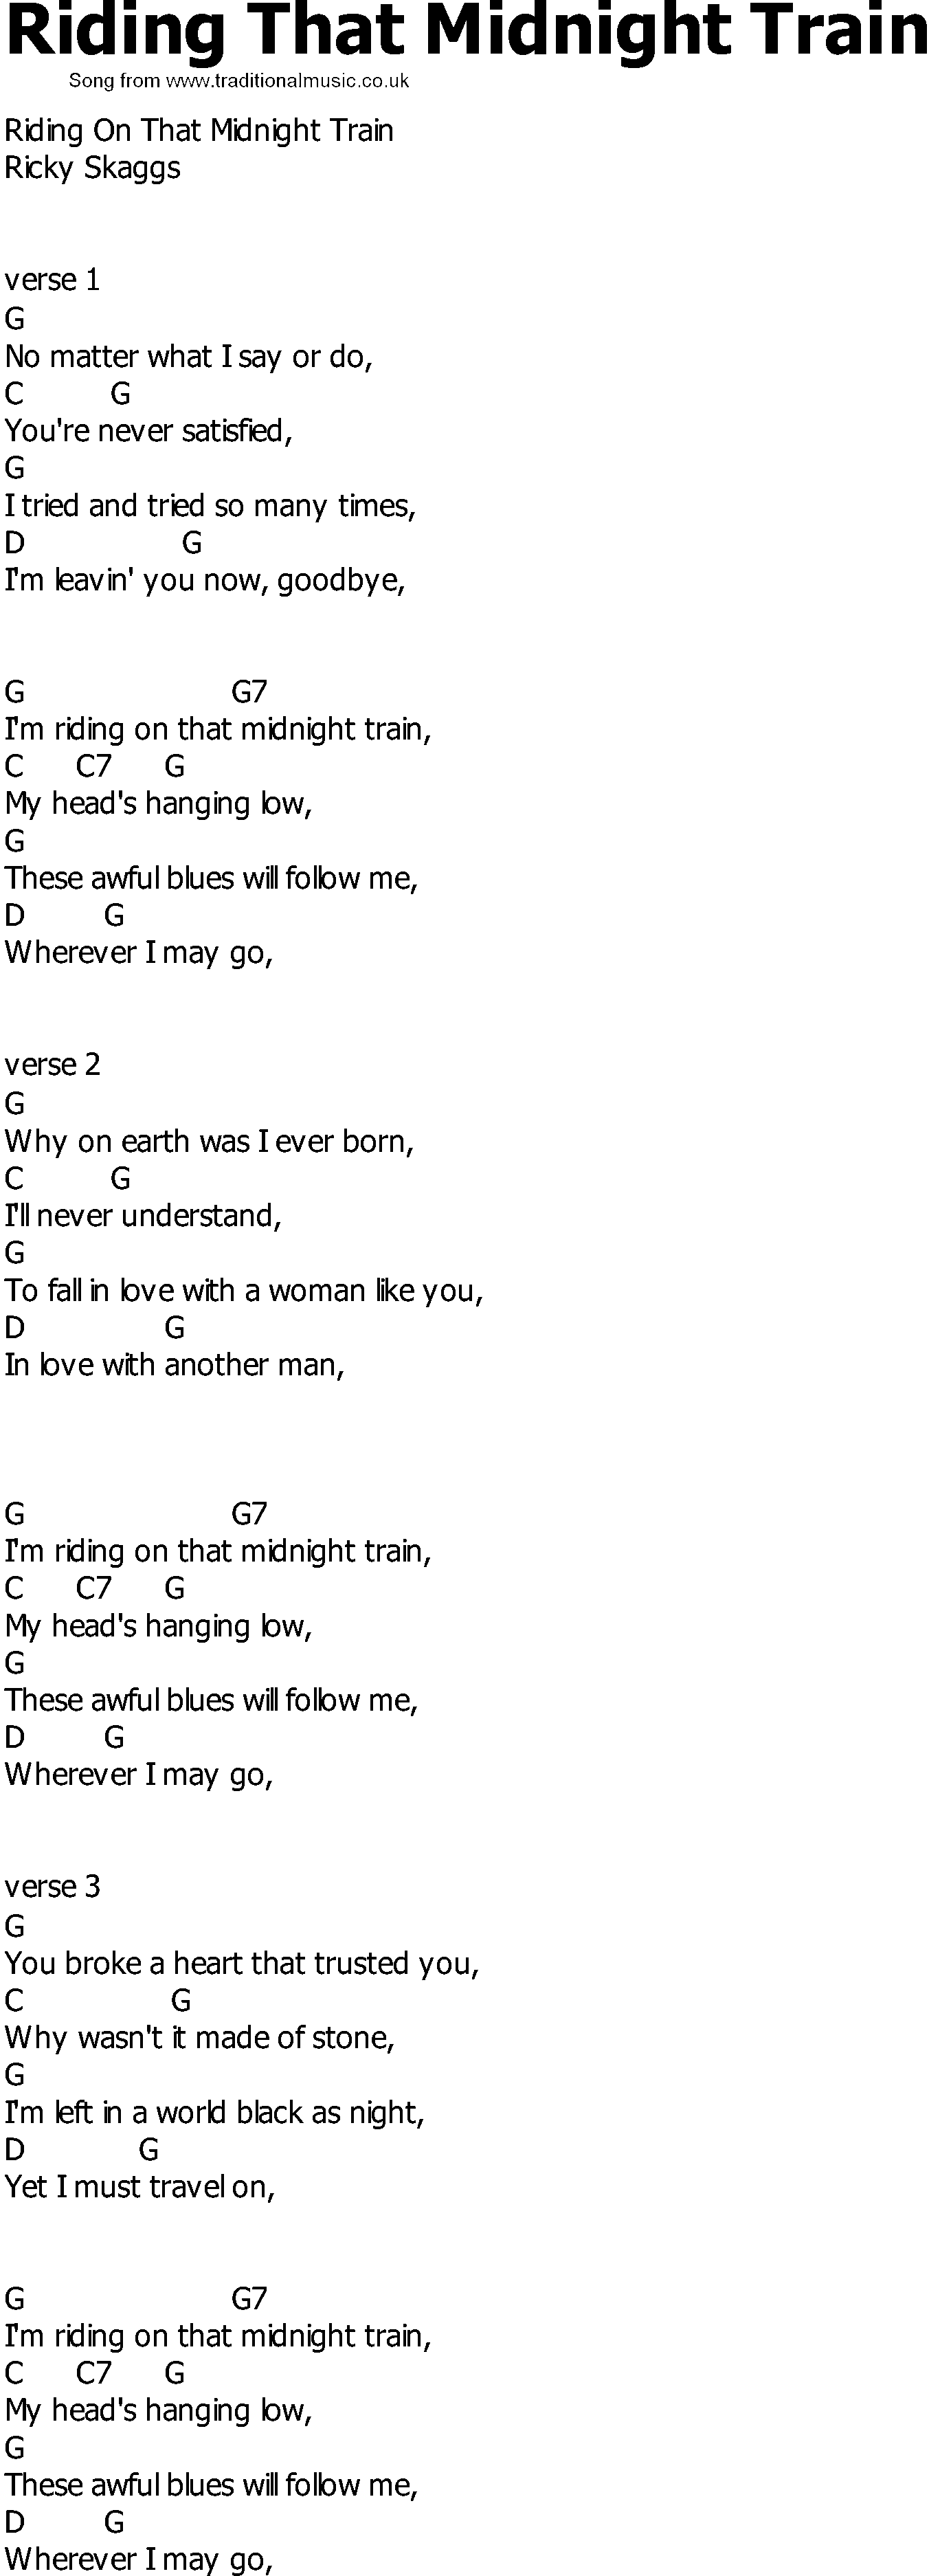 Old Country song lyrics with chords - Riding That Midnight Train